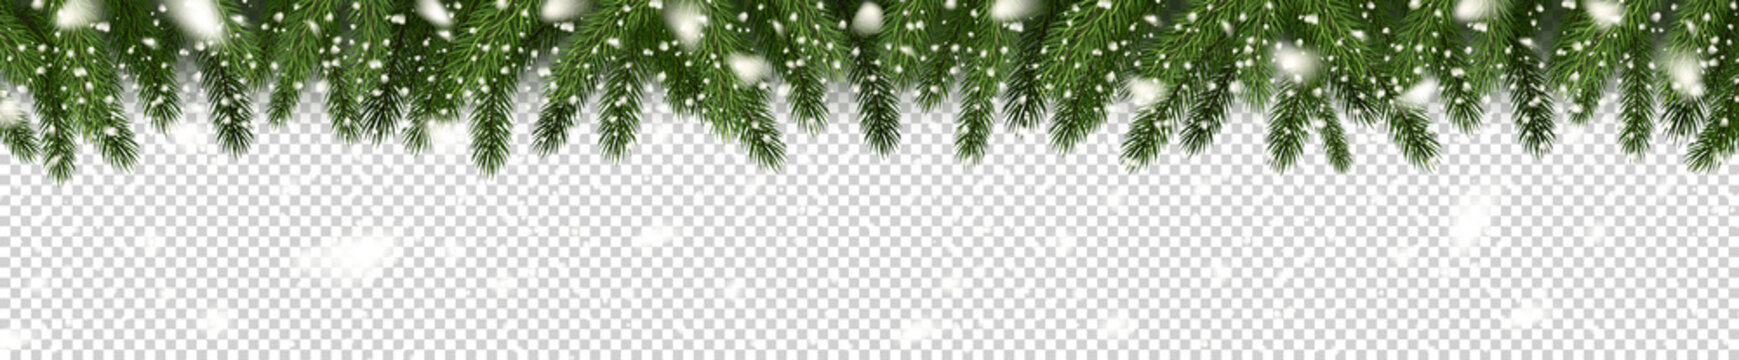 Fir branches and snowflakes on checkered background. Spruce branches. Christmas tree branches. Can be used on any background. Vector illustration